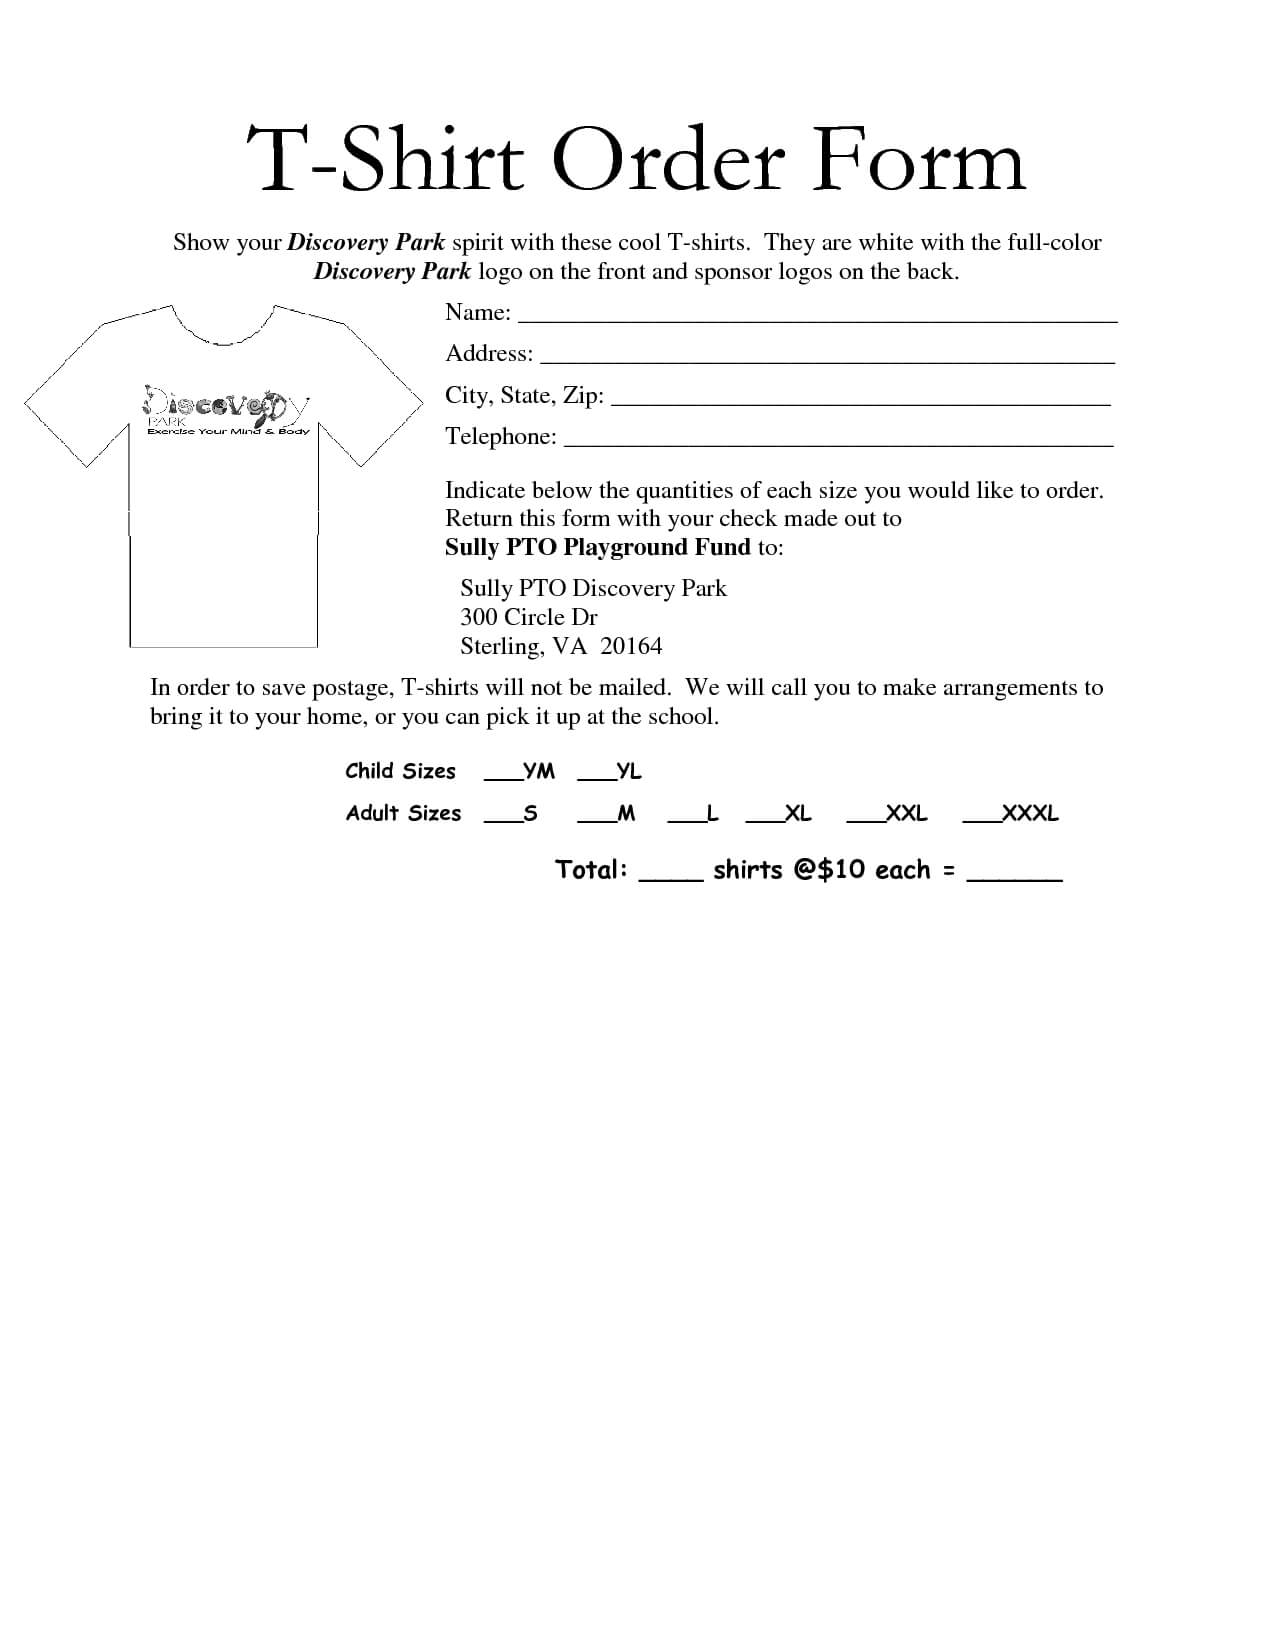 35 Awesome T Shirt Order Form Template Free Images | Order With Regard To Blank T Shirt Order Form Template